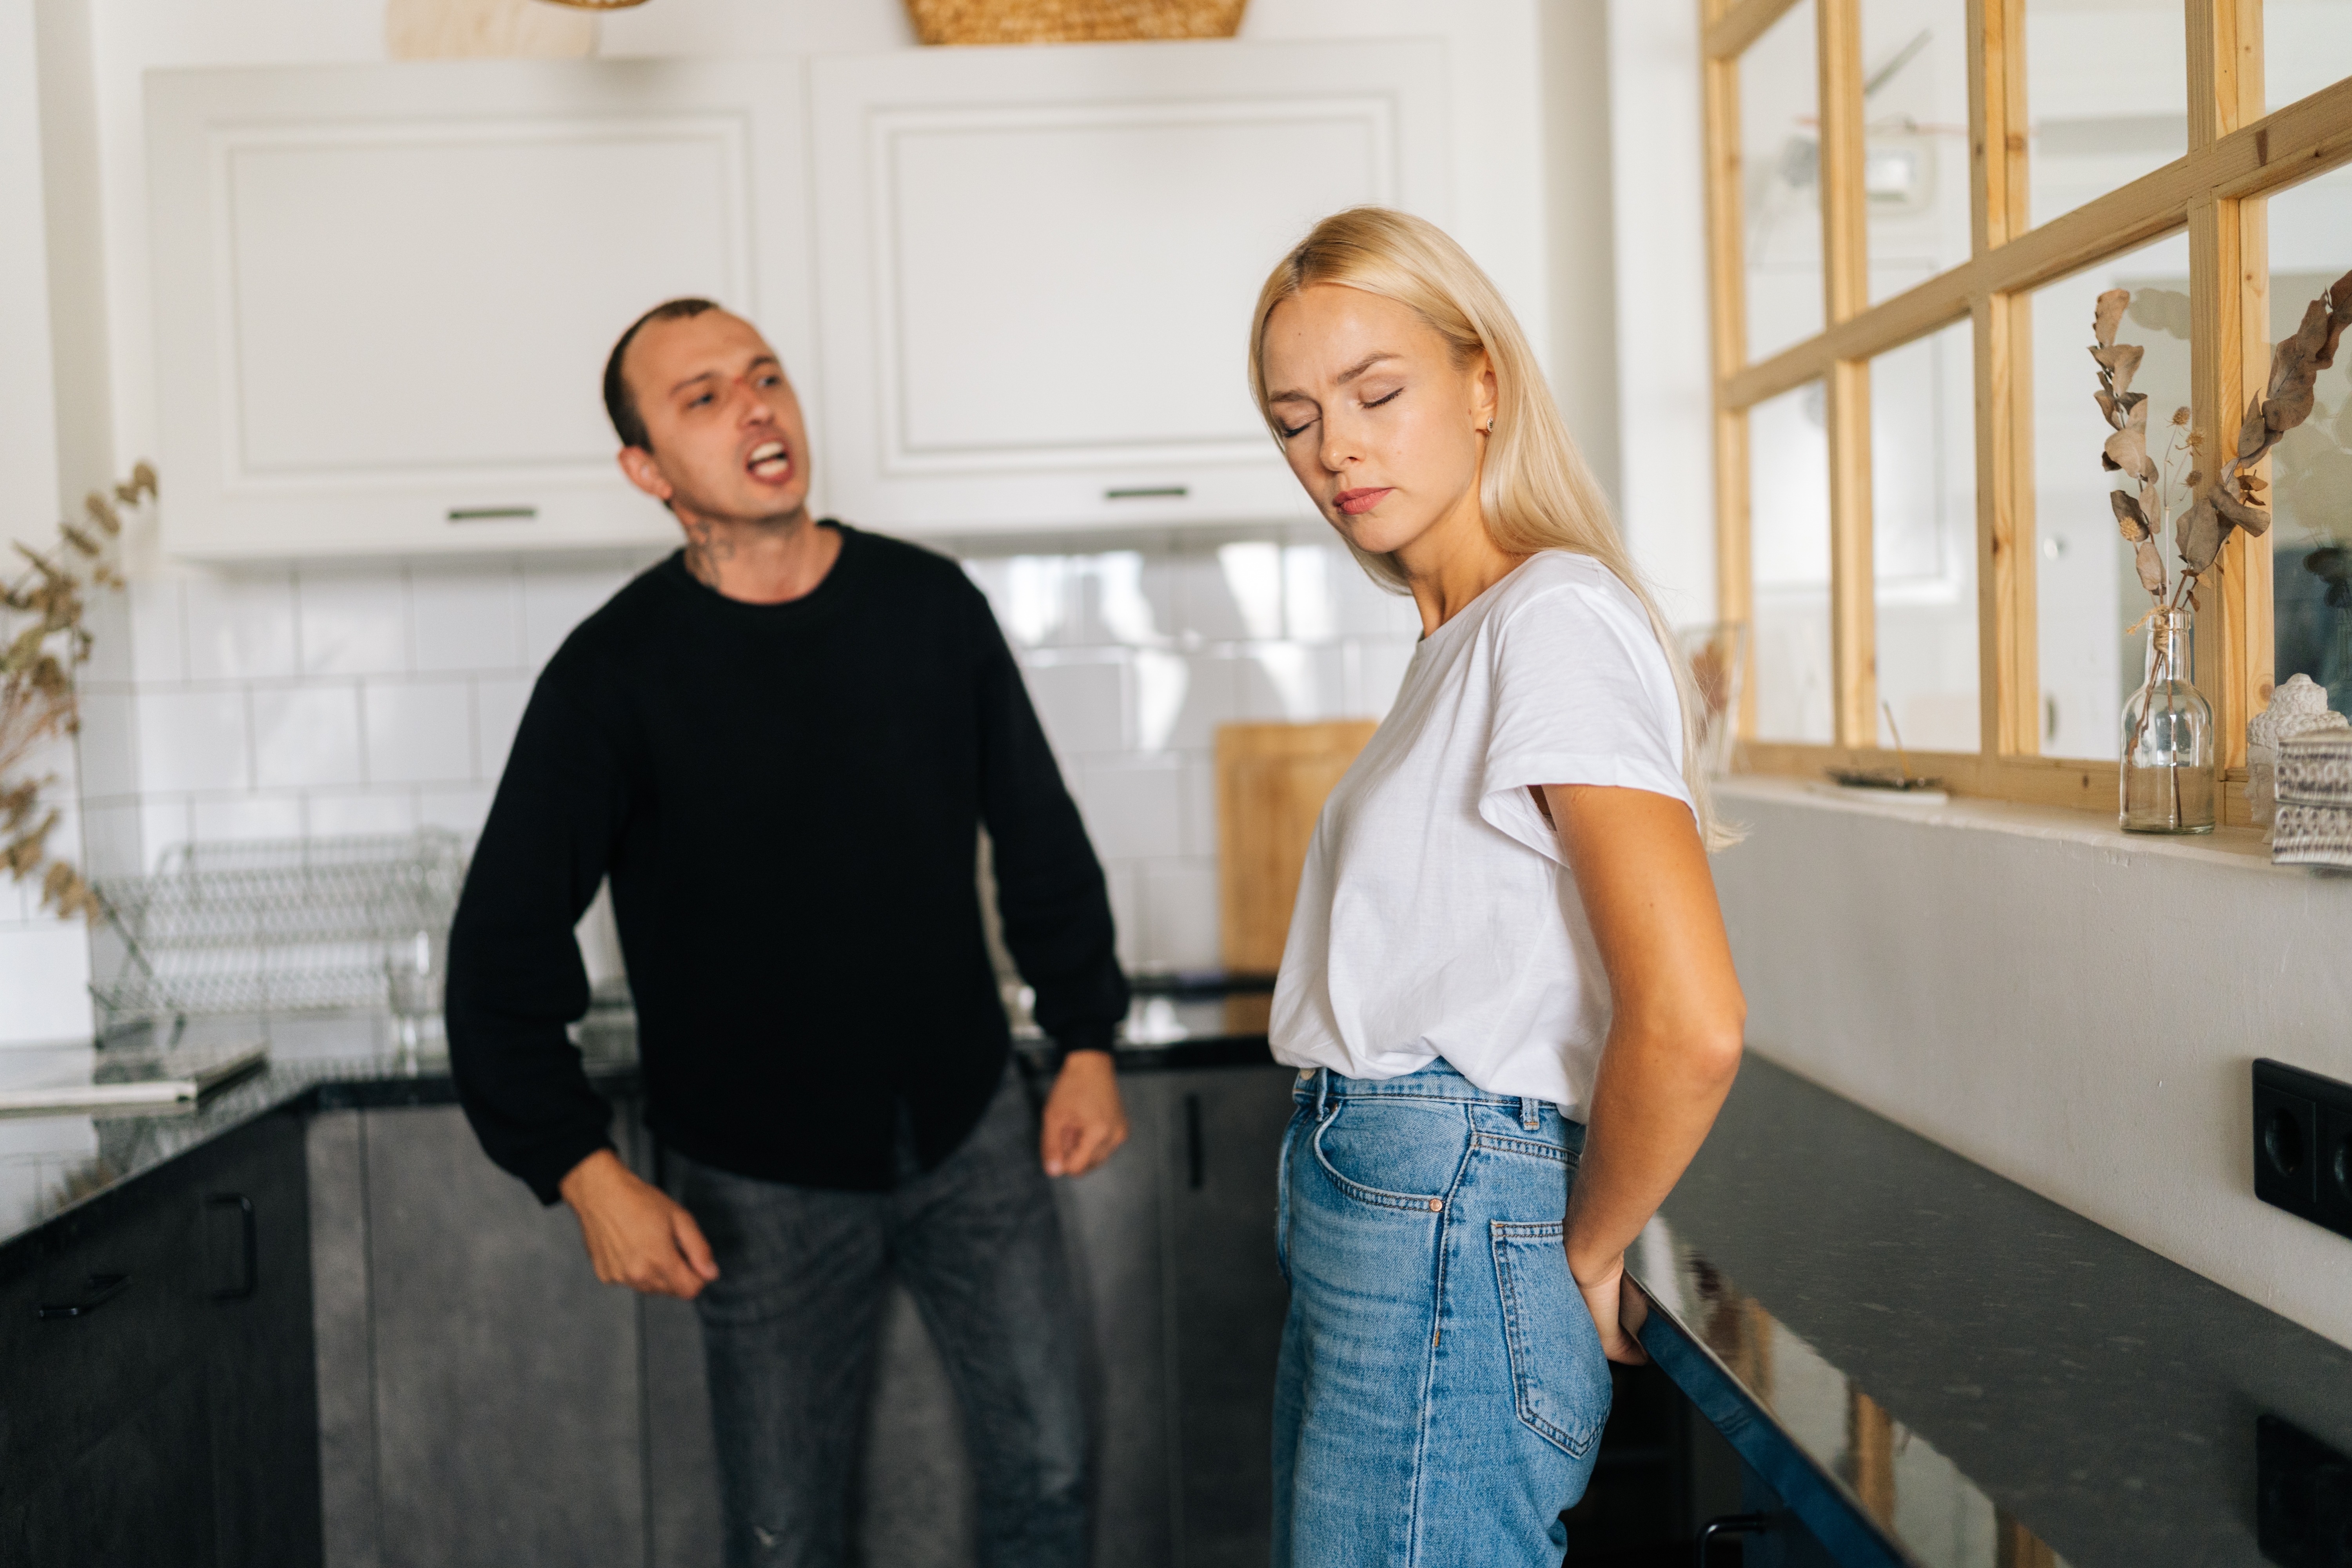 A woman stands in the kitchen with her eyes closed as her man shouts at her | Source: Shutterstock